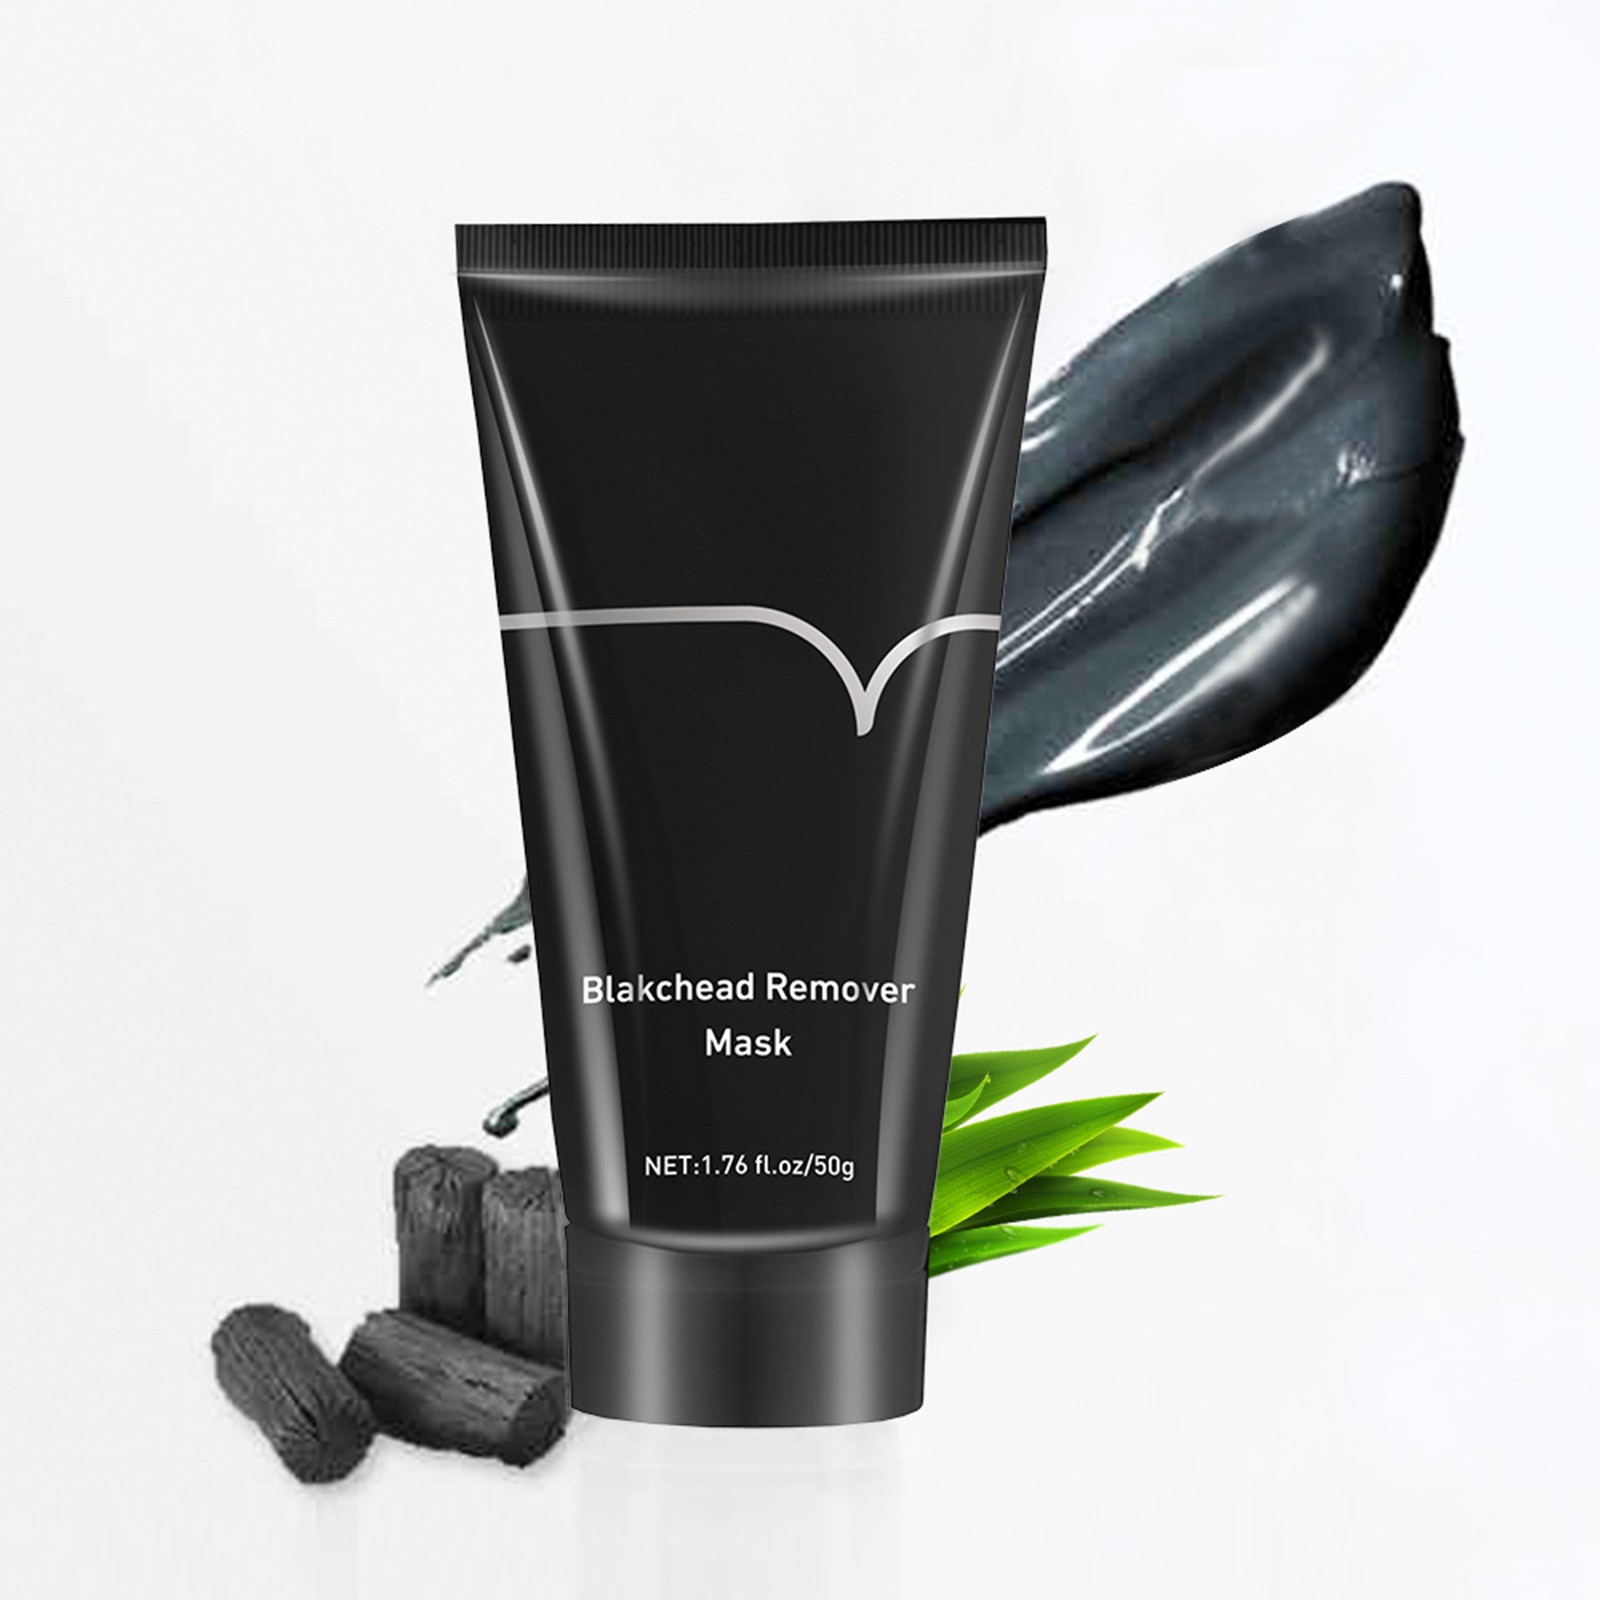 Melotizhi Blackhead Removal Purifying Exfoliating For Deep Cleaning Blackheads Dirt Pores Nose 50g - image 2 of 8